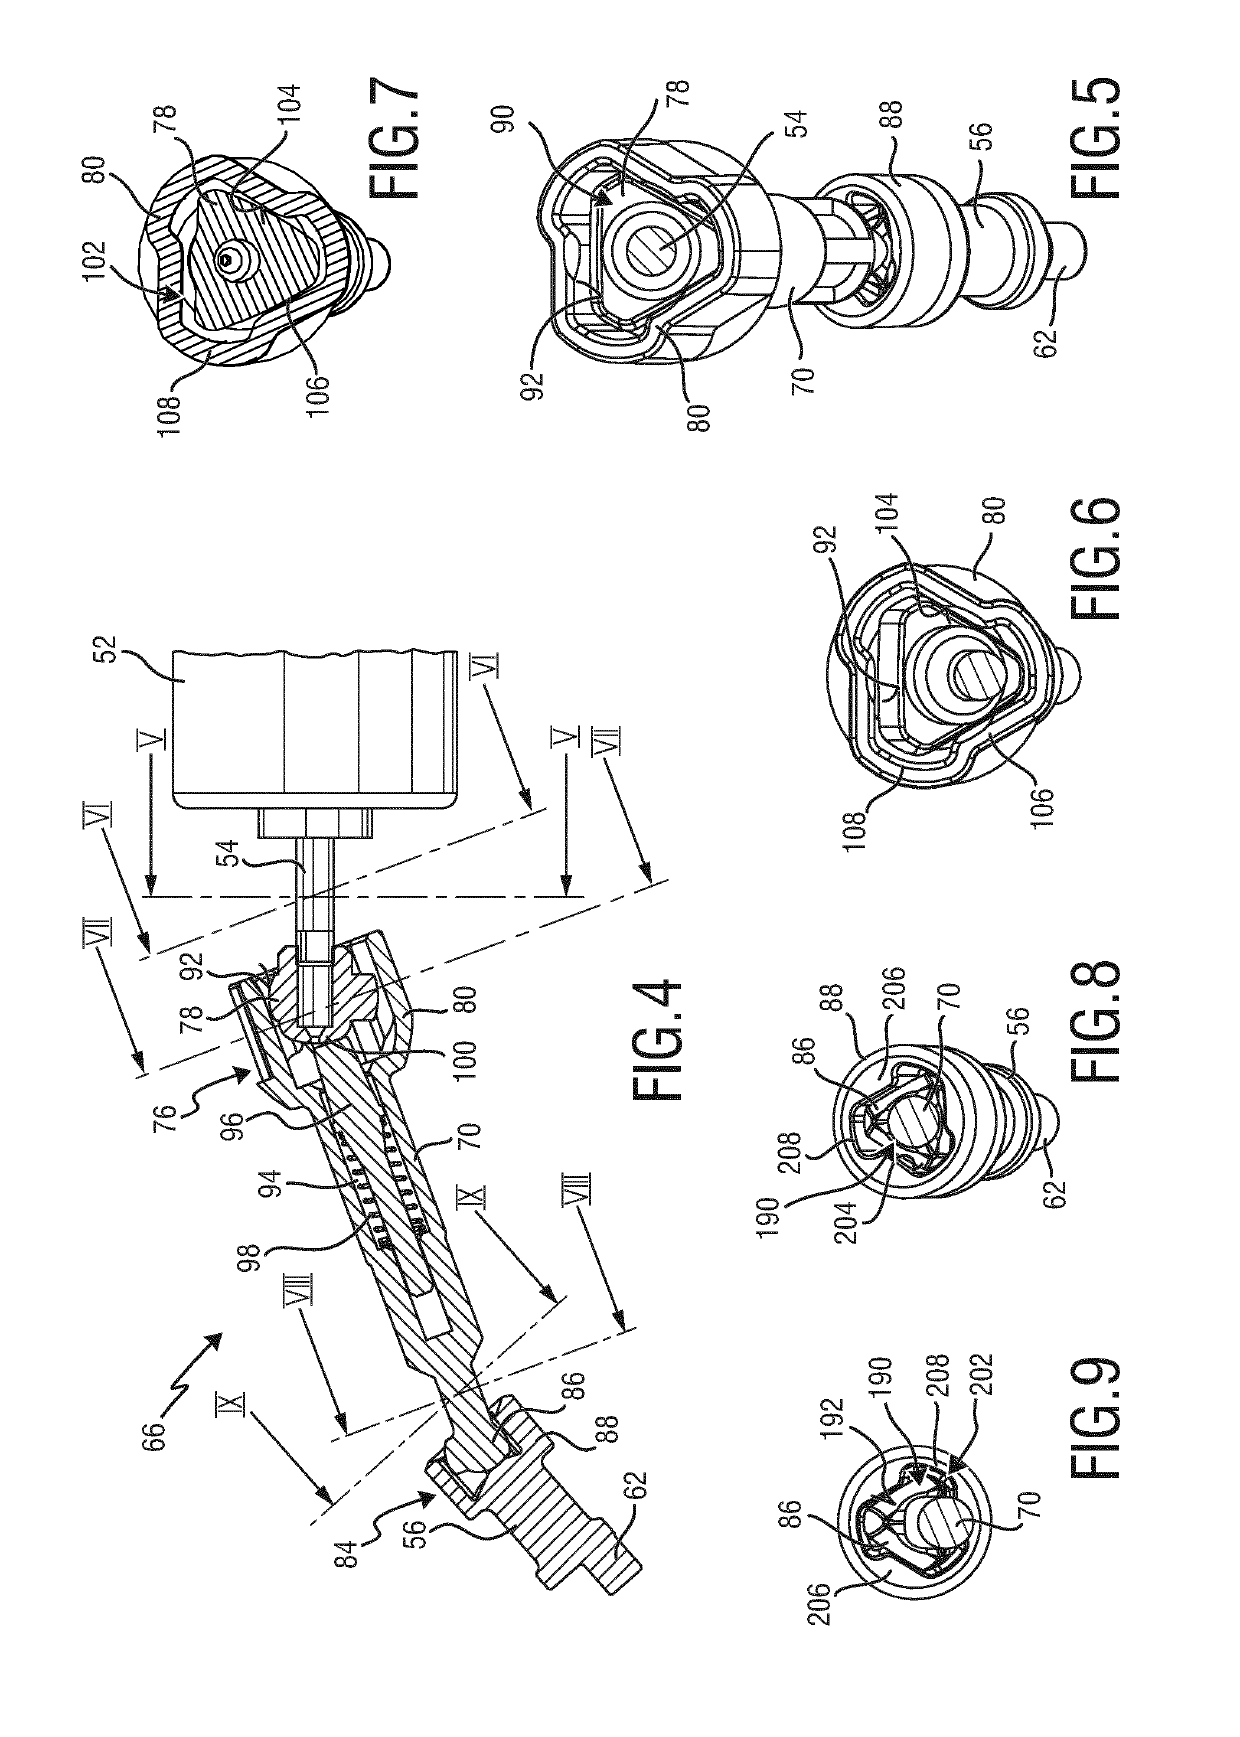 Coupling mechanism for a drive train of a hair cutting appliance